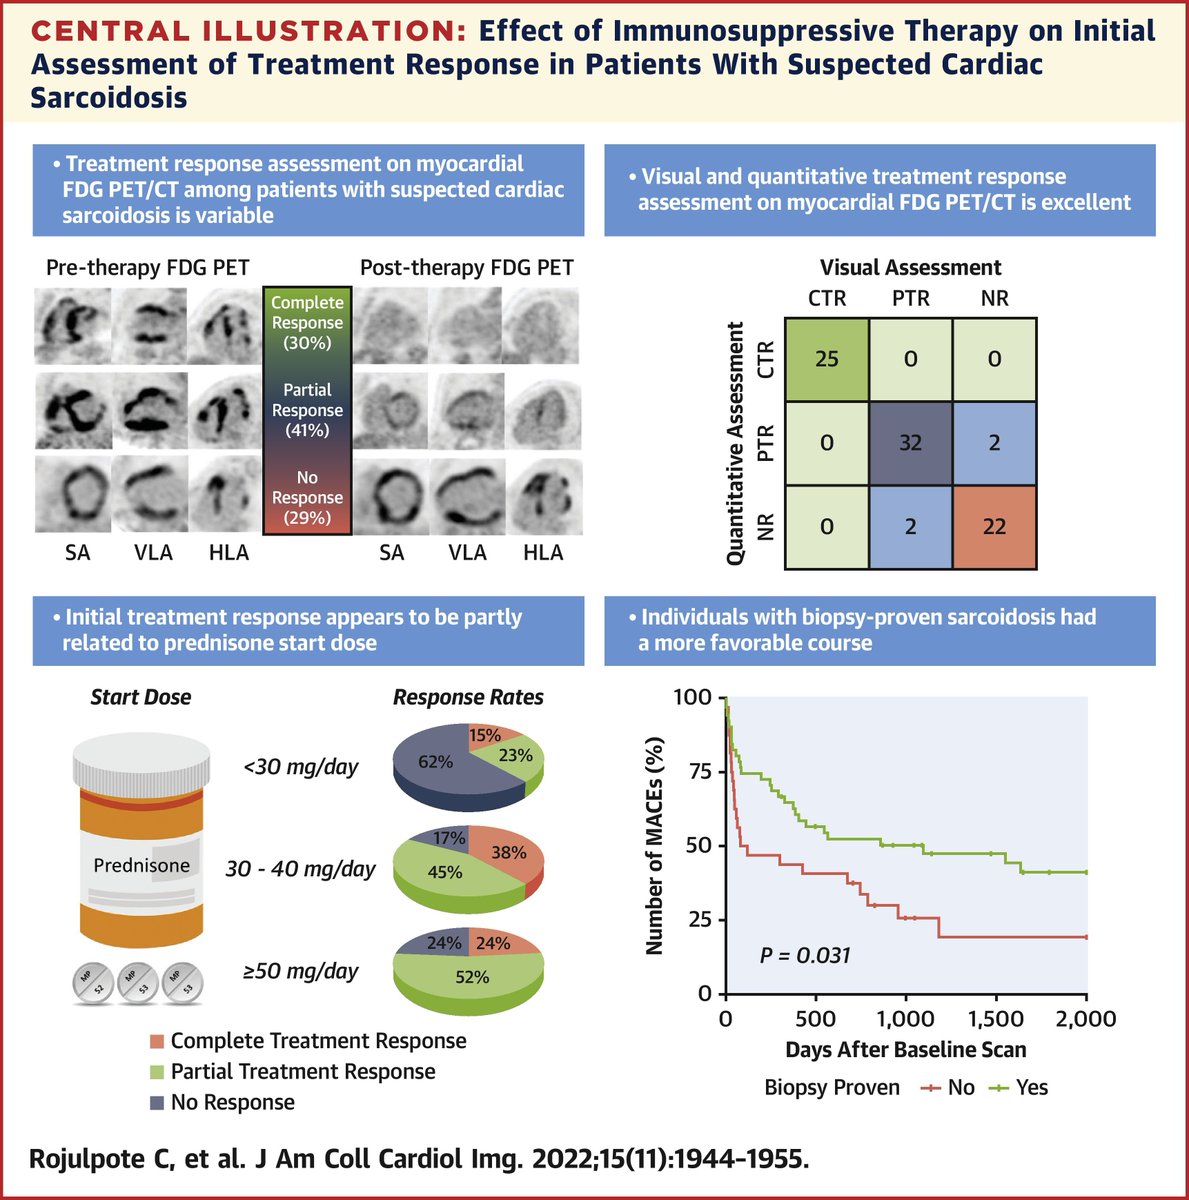 Through #cvNuc FDG-PET, a favorable response was more common when using moderate-to-high intensity steroids. After nearly 5 years, biopsy-proven and with preserved systolic function were less likely to experience adverse outcomes. bit.ly/3isrRLd #JACCIMG #Sarcoidosis